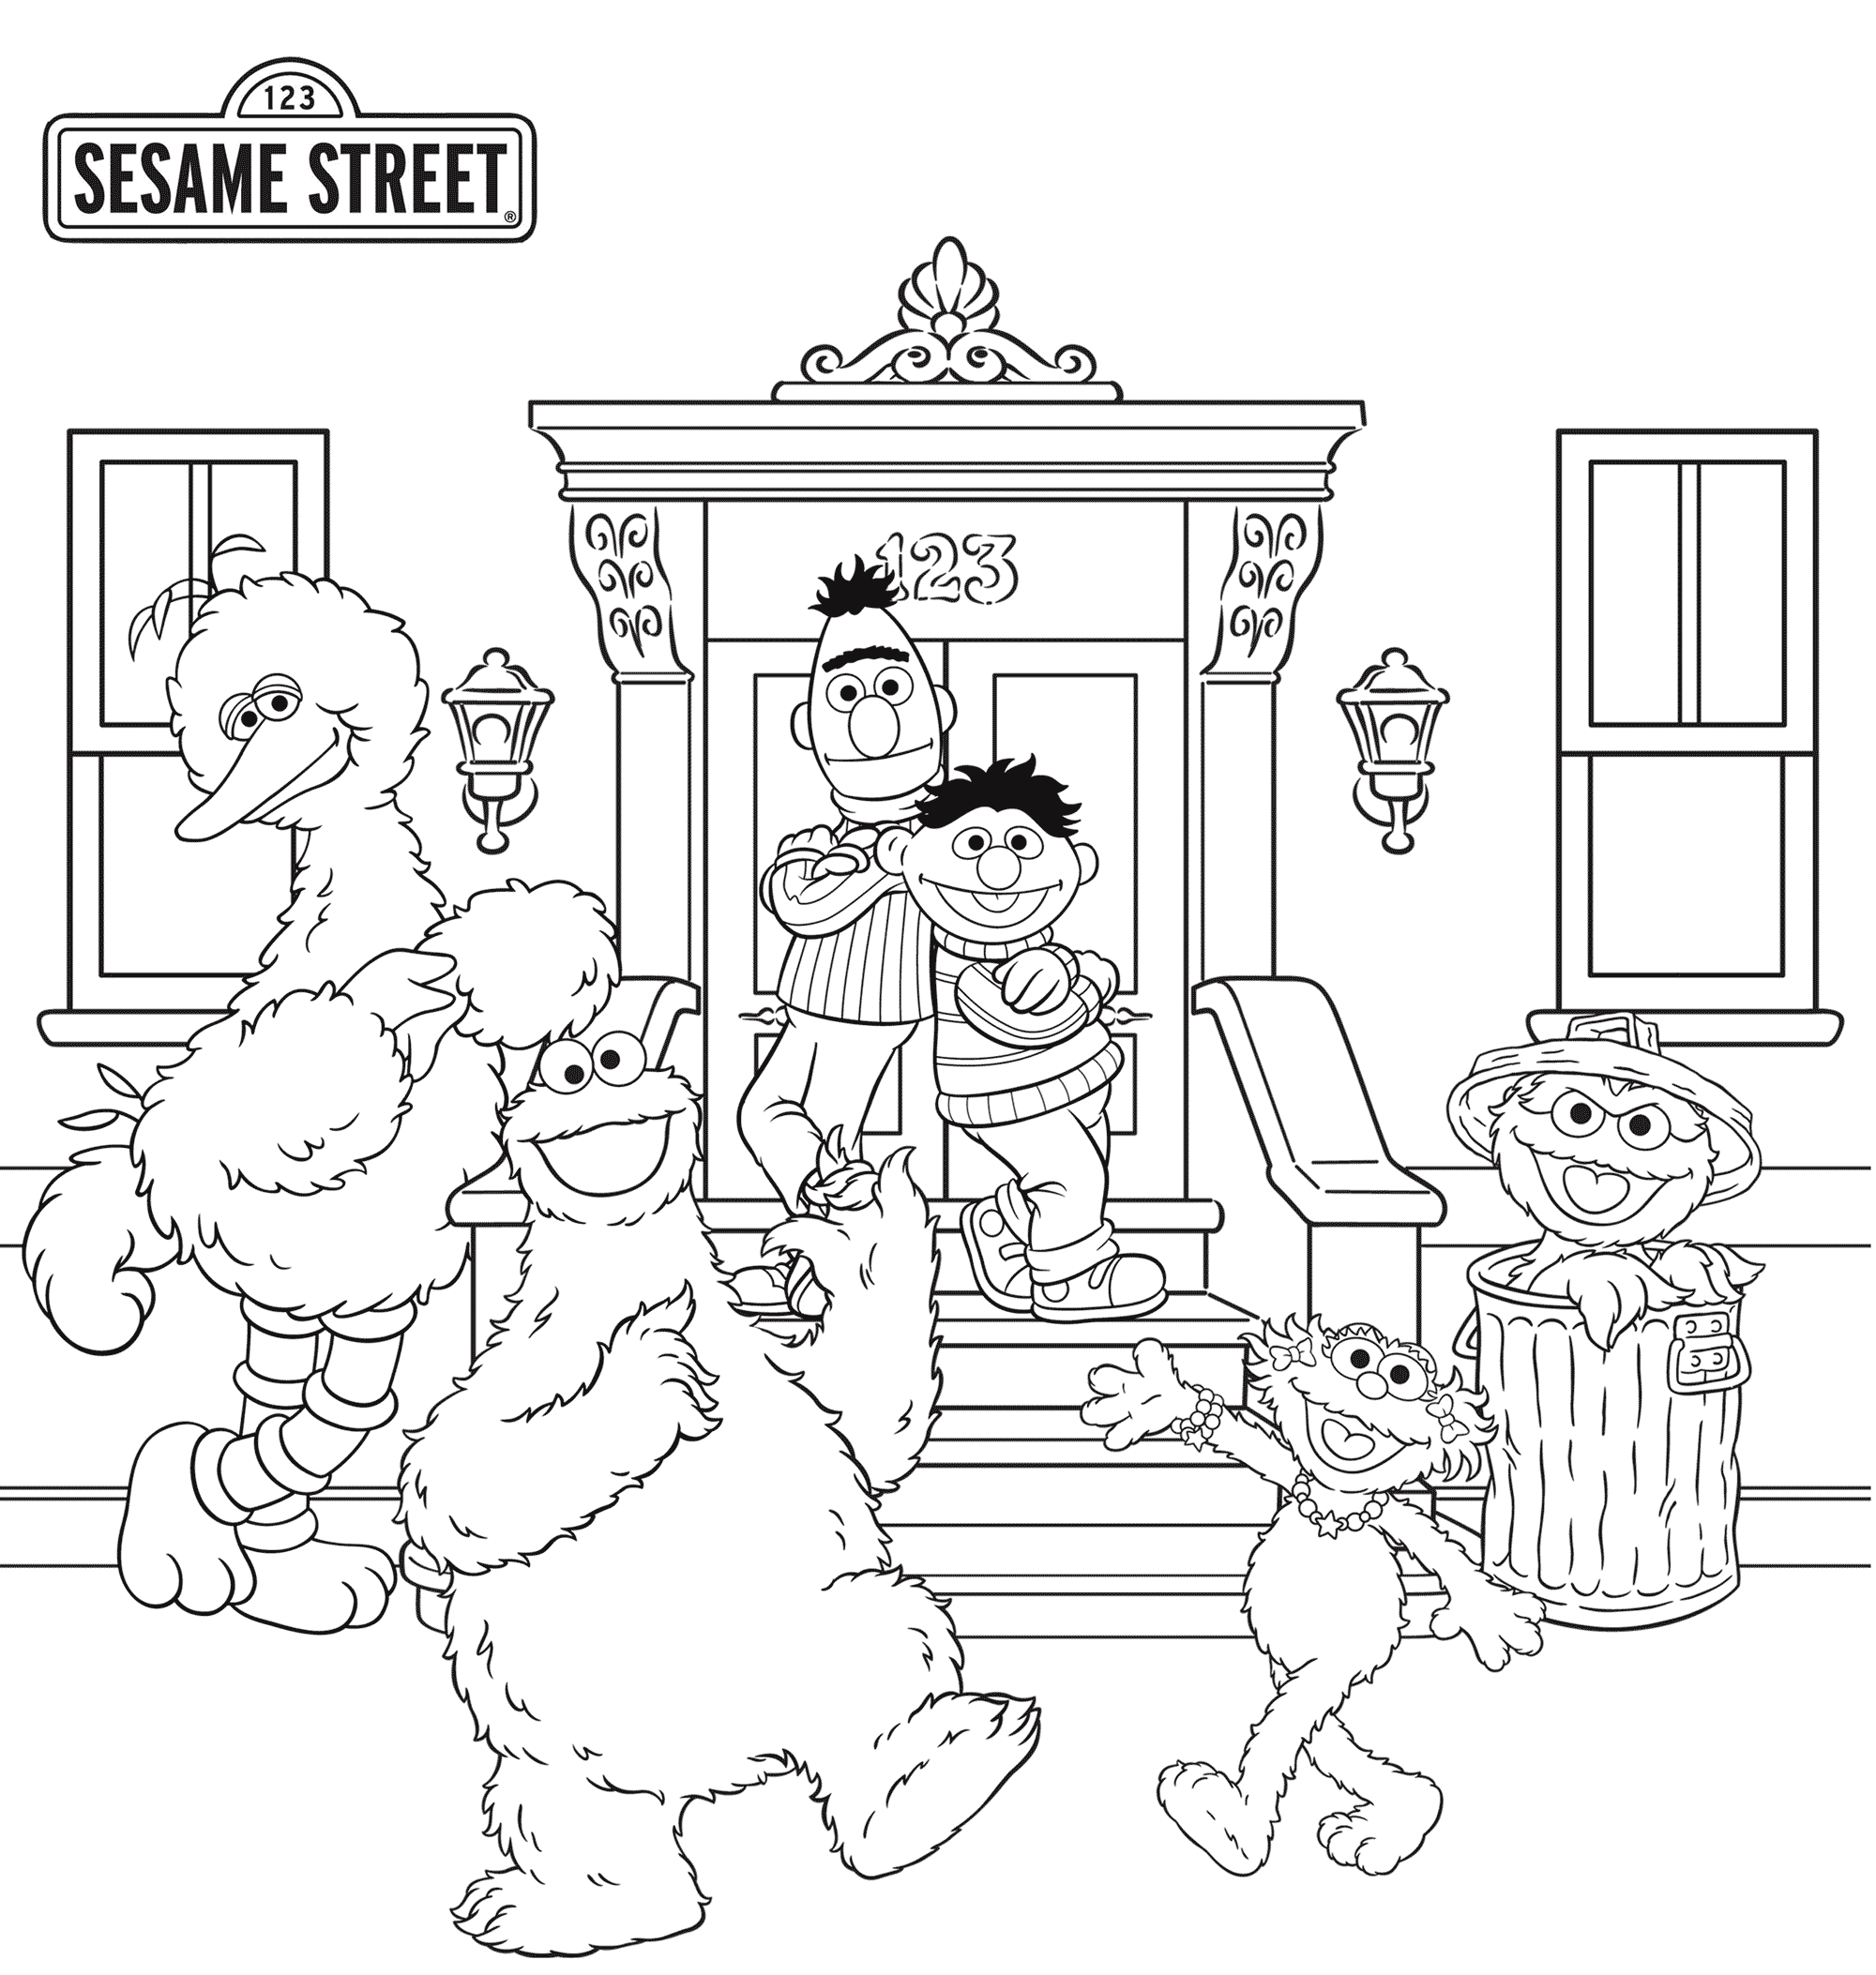 Sesame Street Coloring Page To Print - Coloring Home